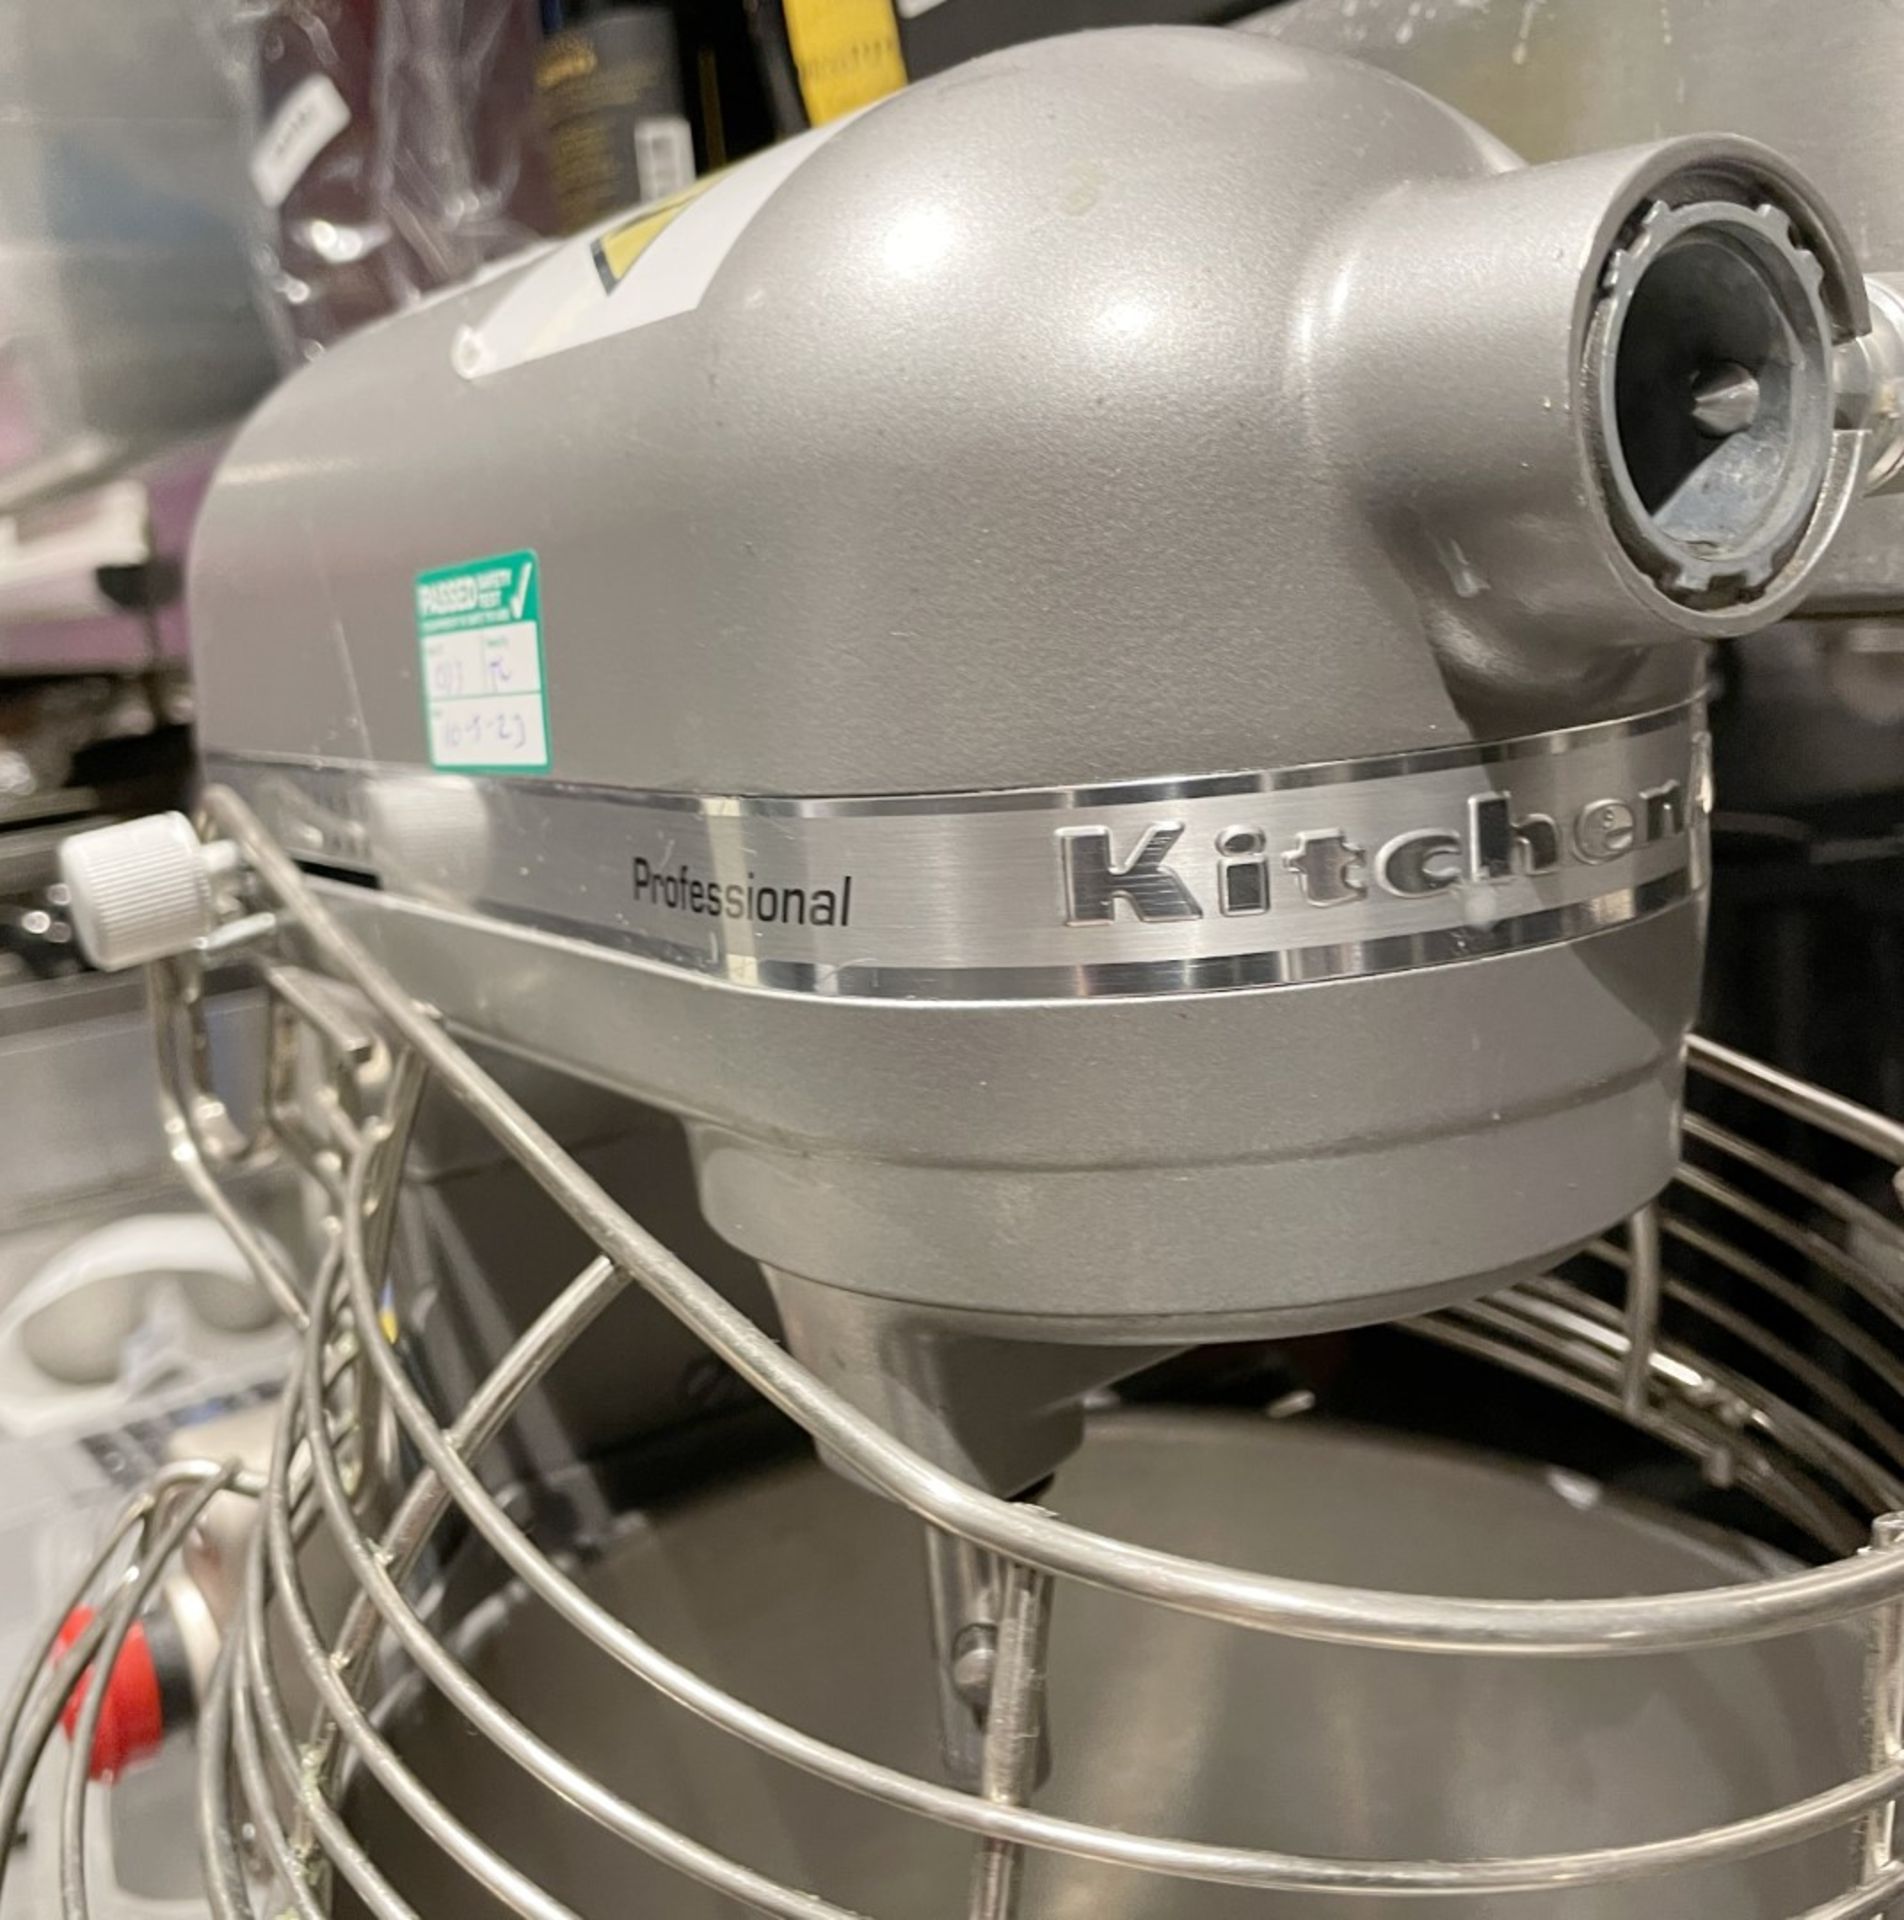 1 x Kitchenaid 6.9 Ltr Commercial Planetary Food Mixer - Model 5KSM7990XBSL - Includes Mixing Bowl - Image 13 of 16